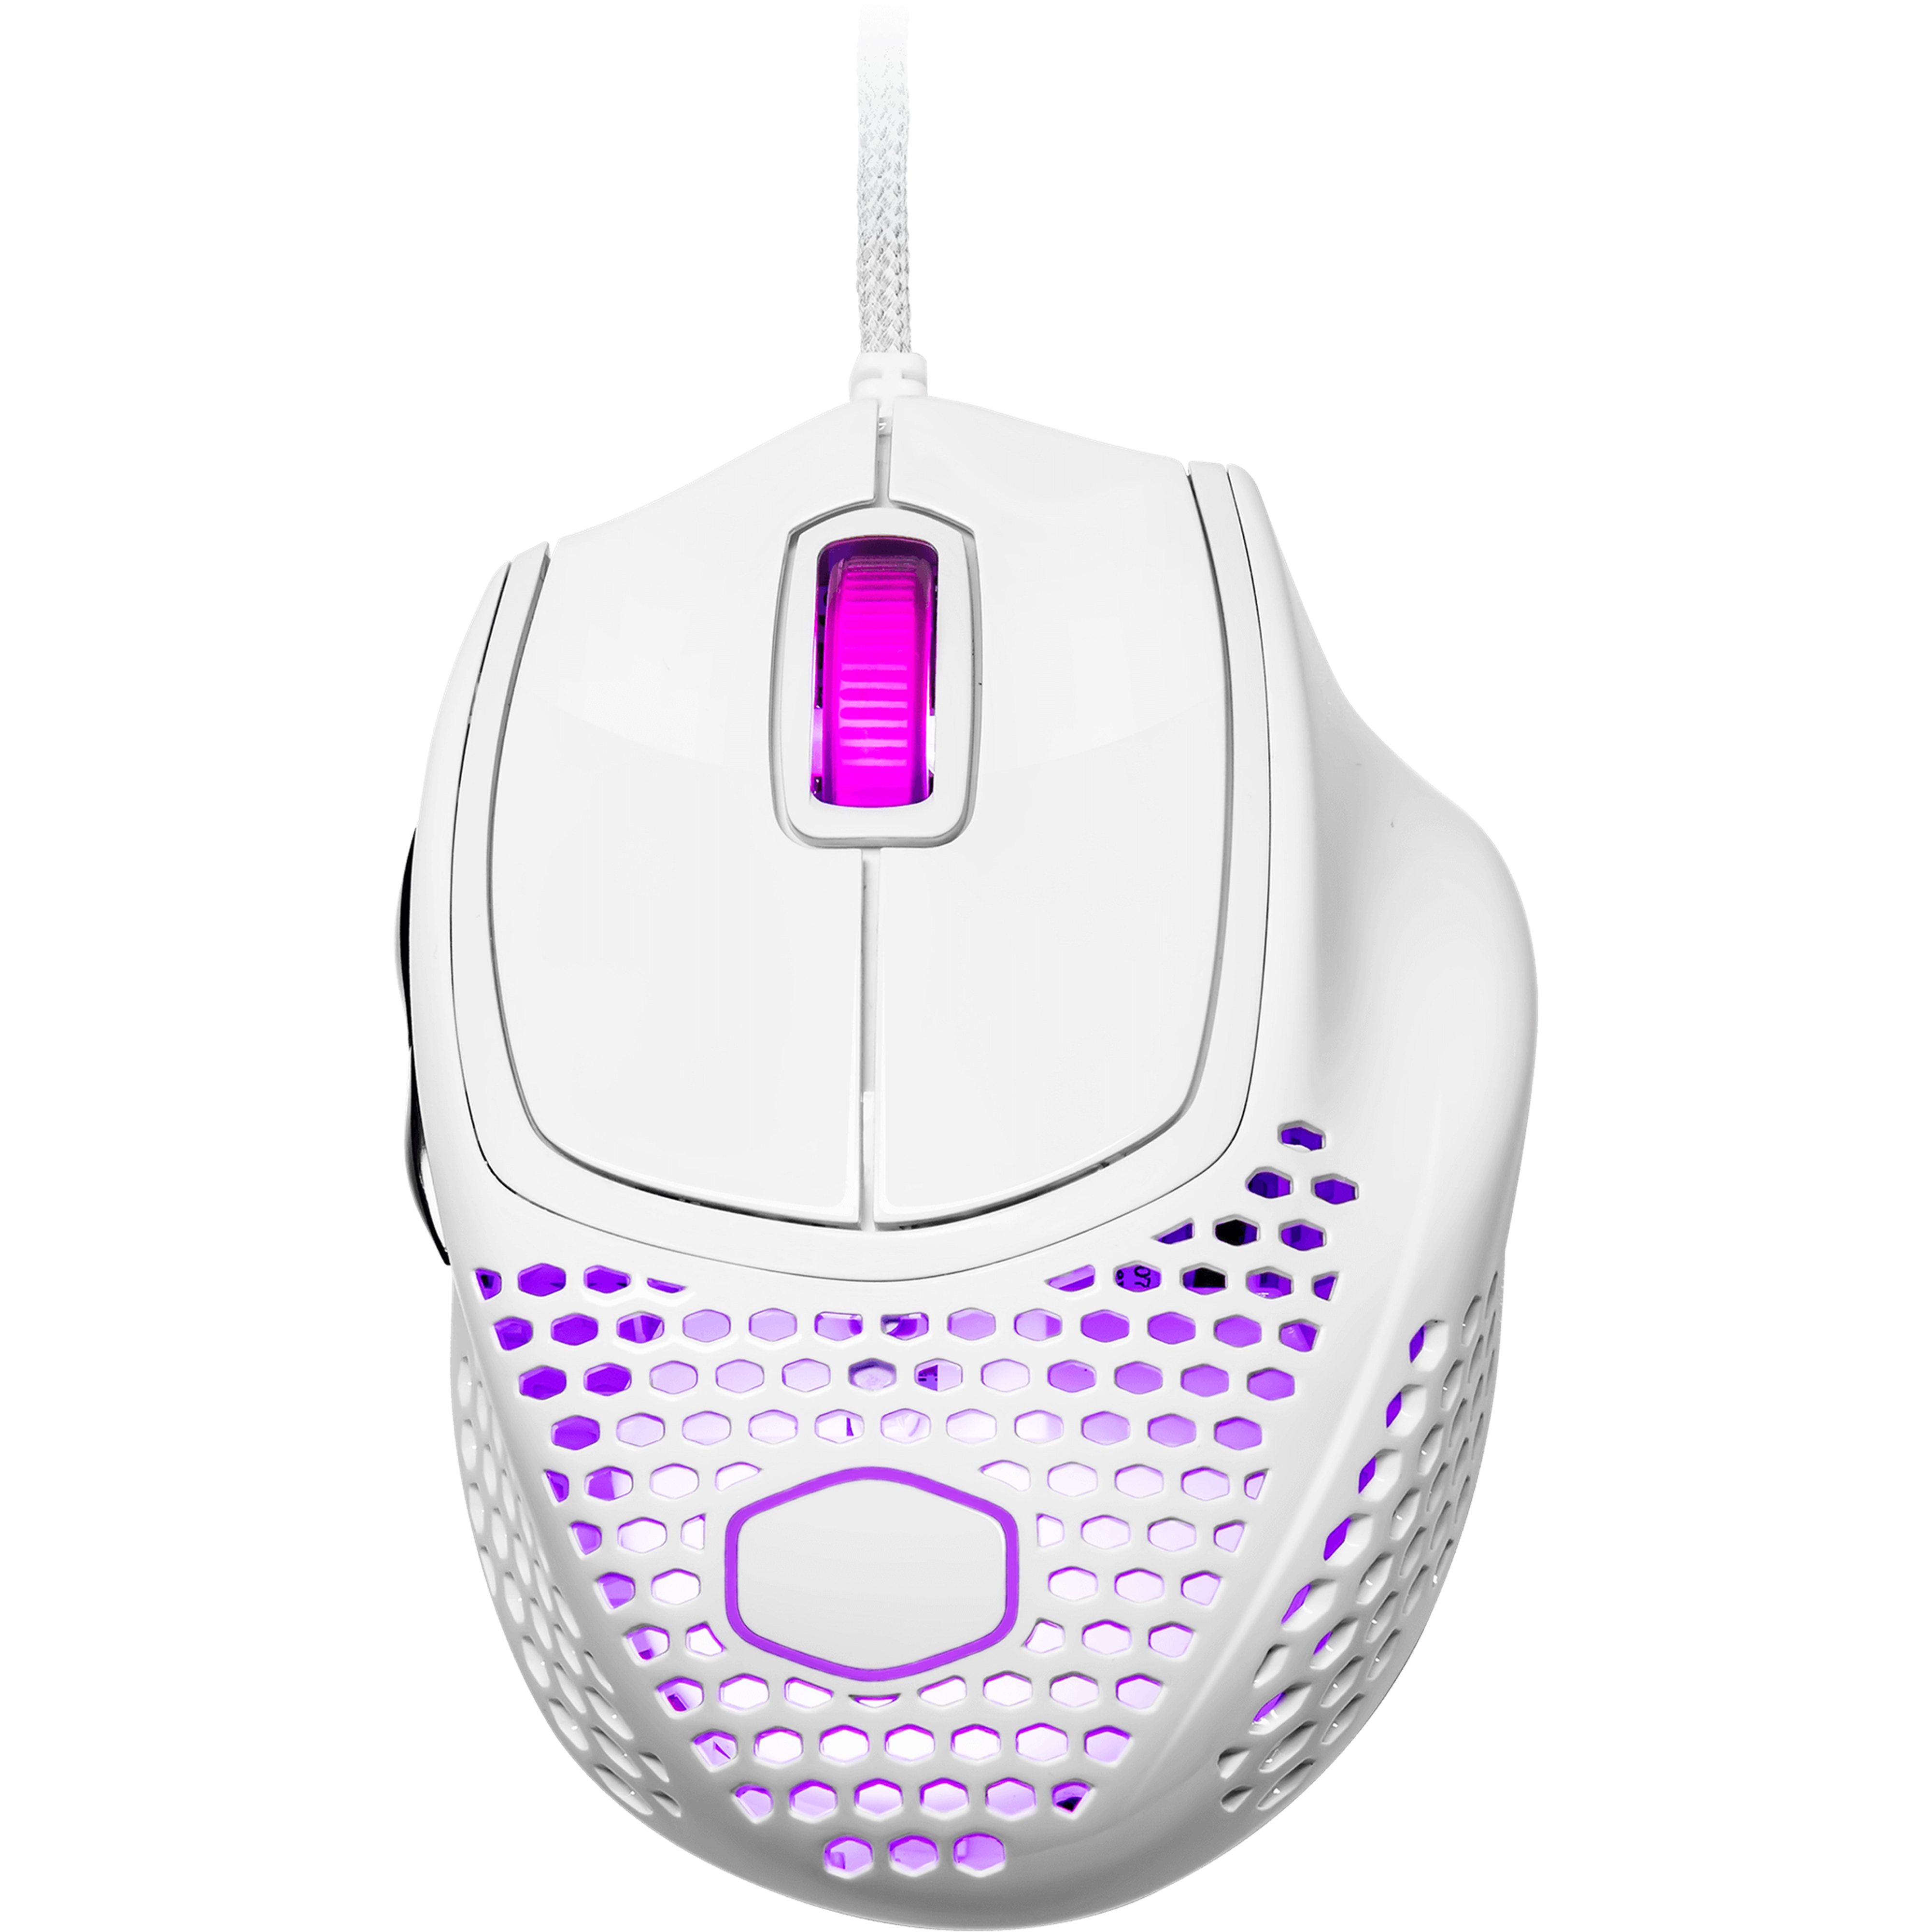 MM720 RGB Gaming Mouse | Cooler Master